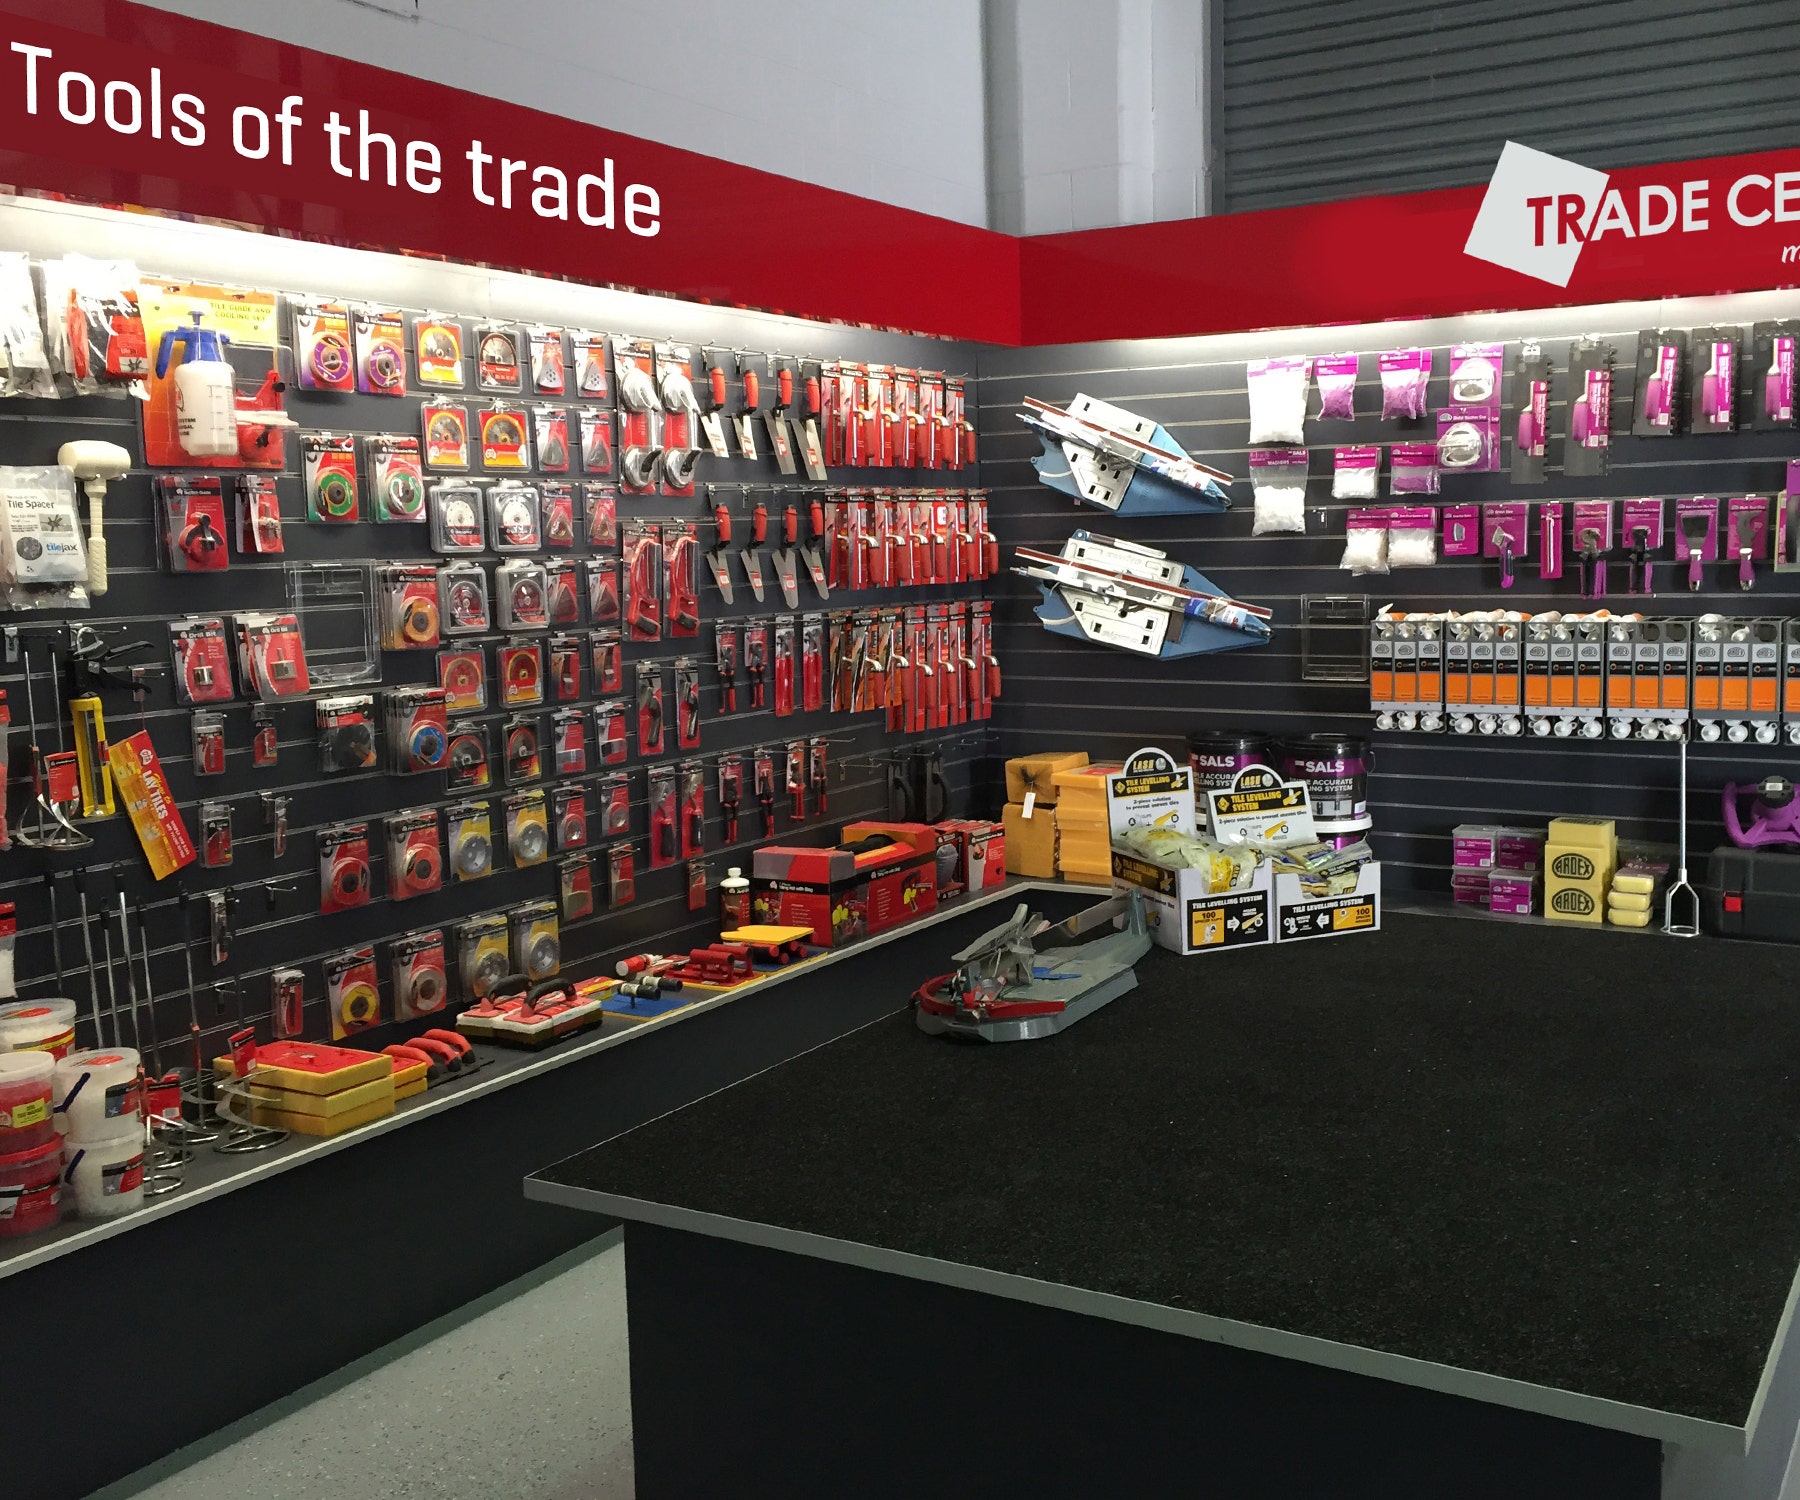 A wall full of tools and trade products in one of the Beaumont Tiles Trade Centrals